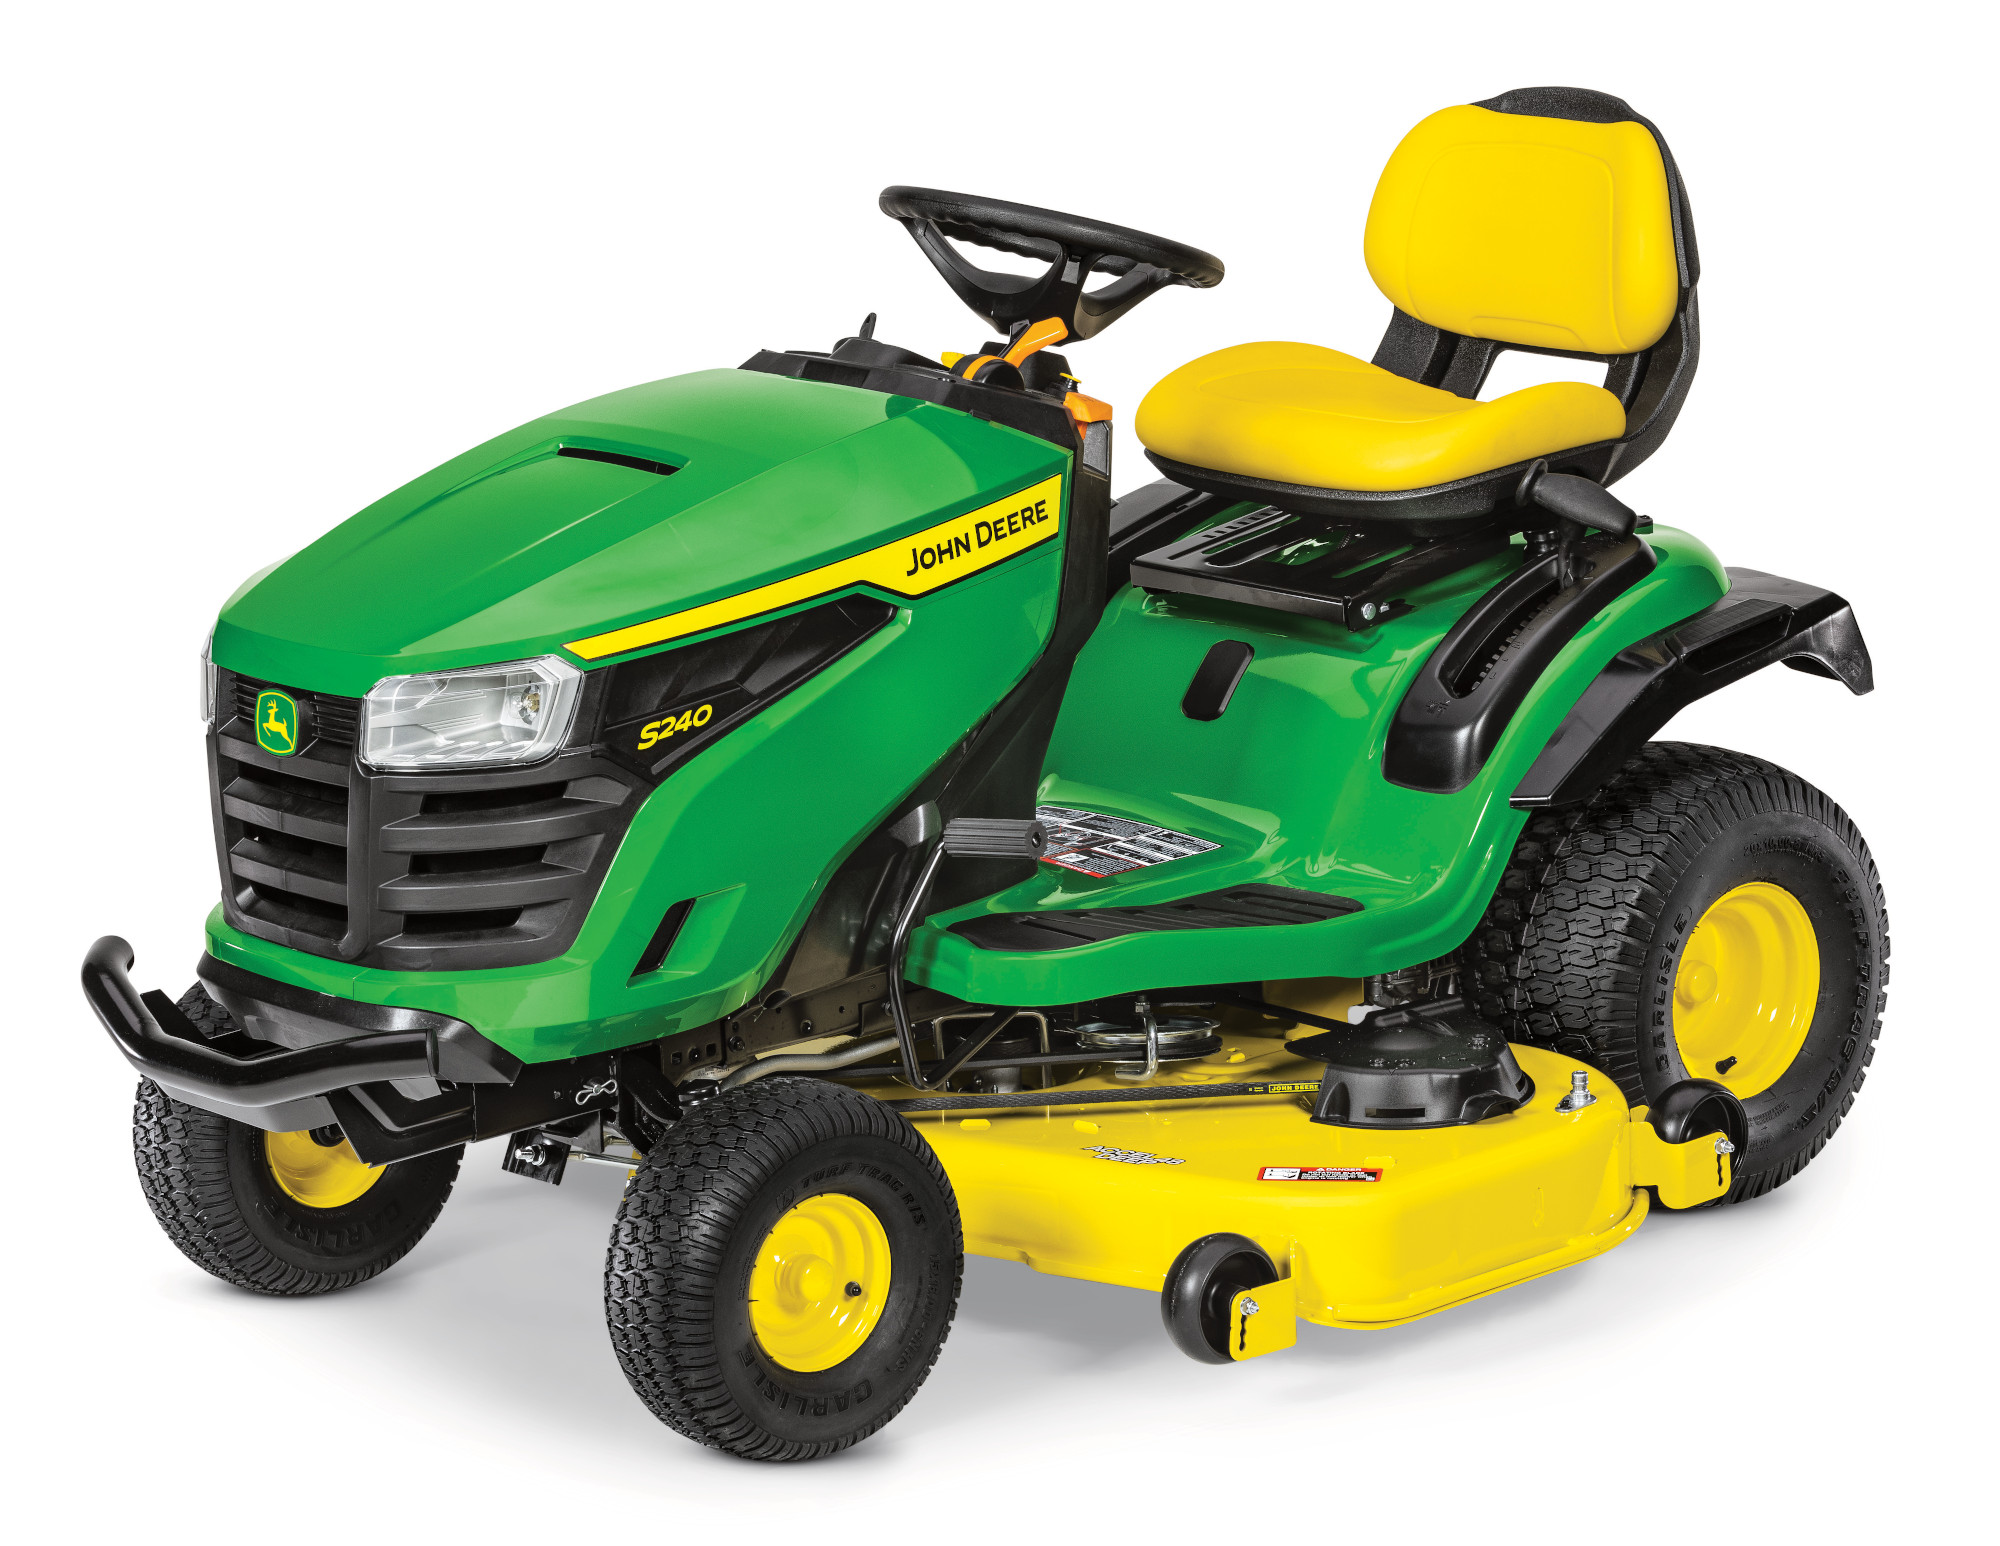 S240 Lawn Tractor with 42-inch Deck